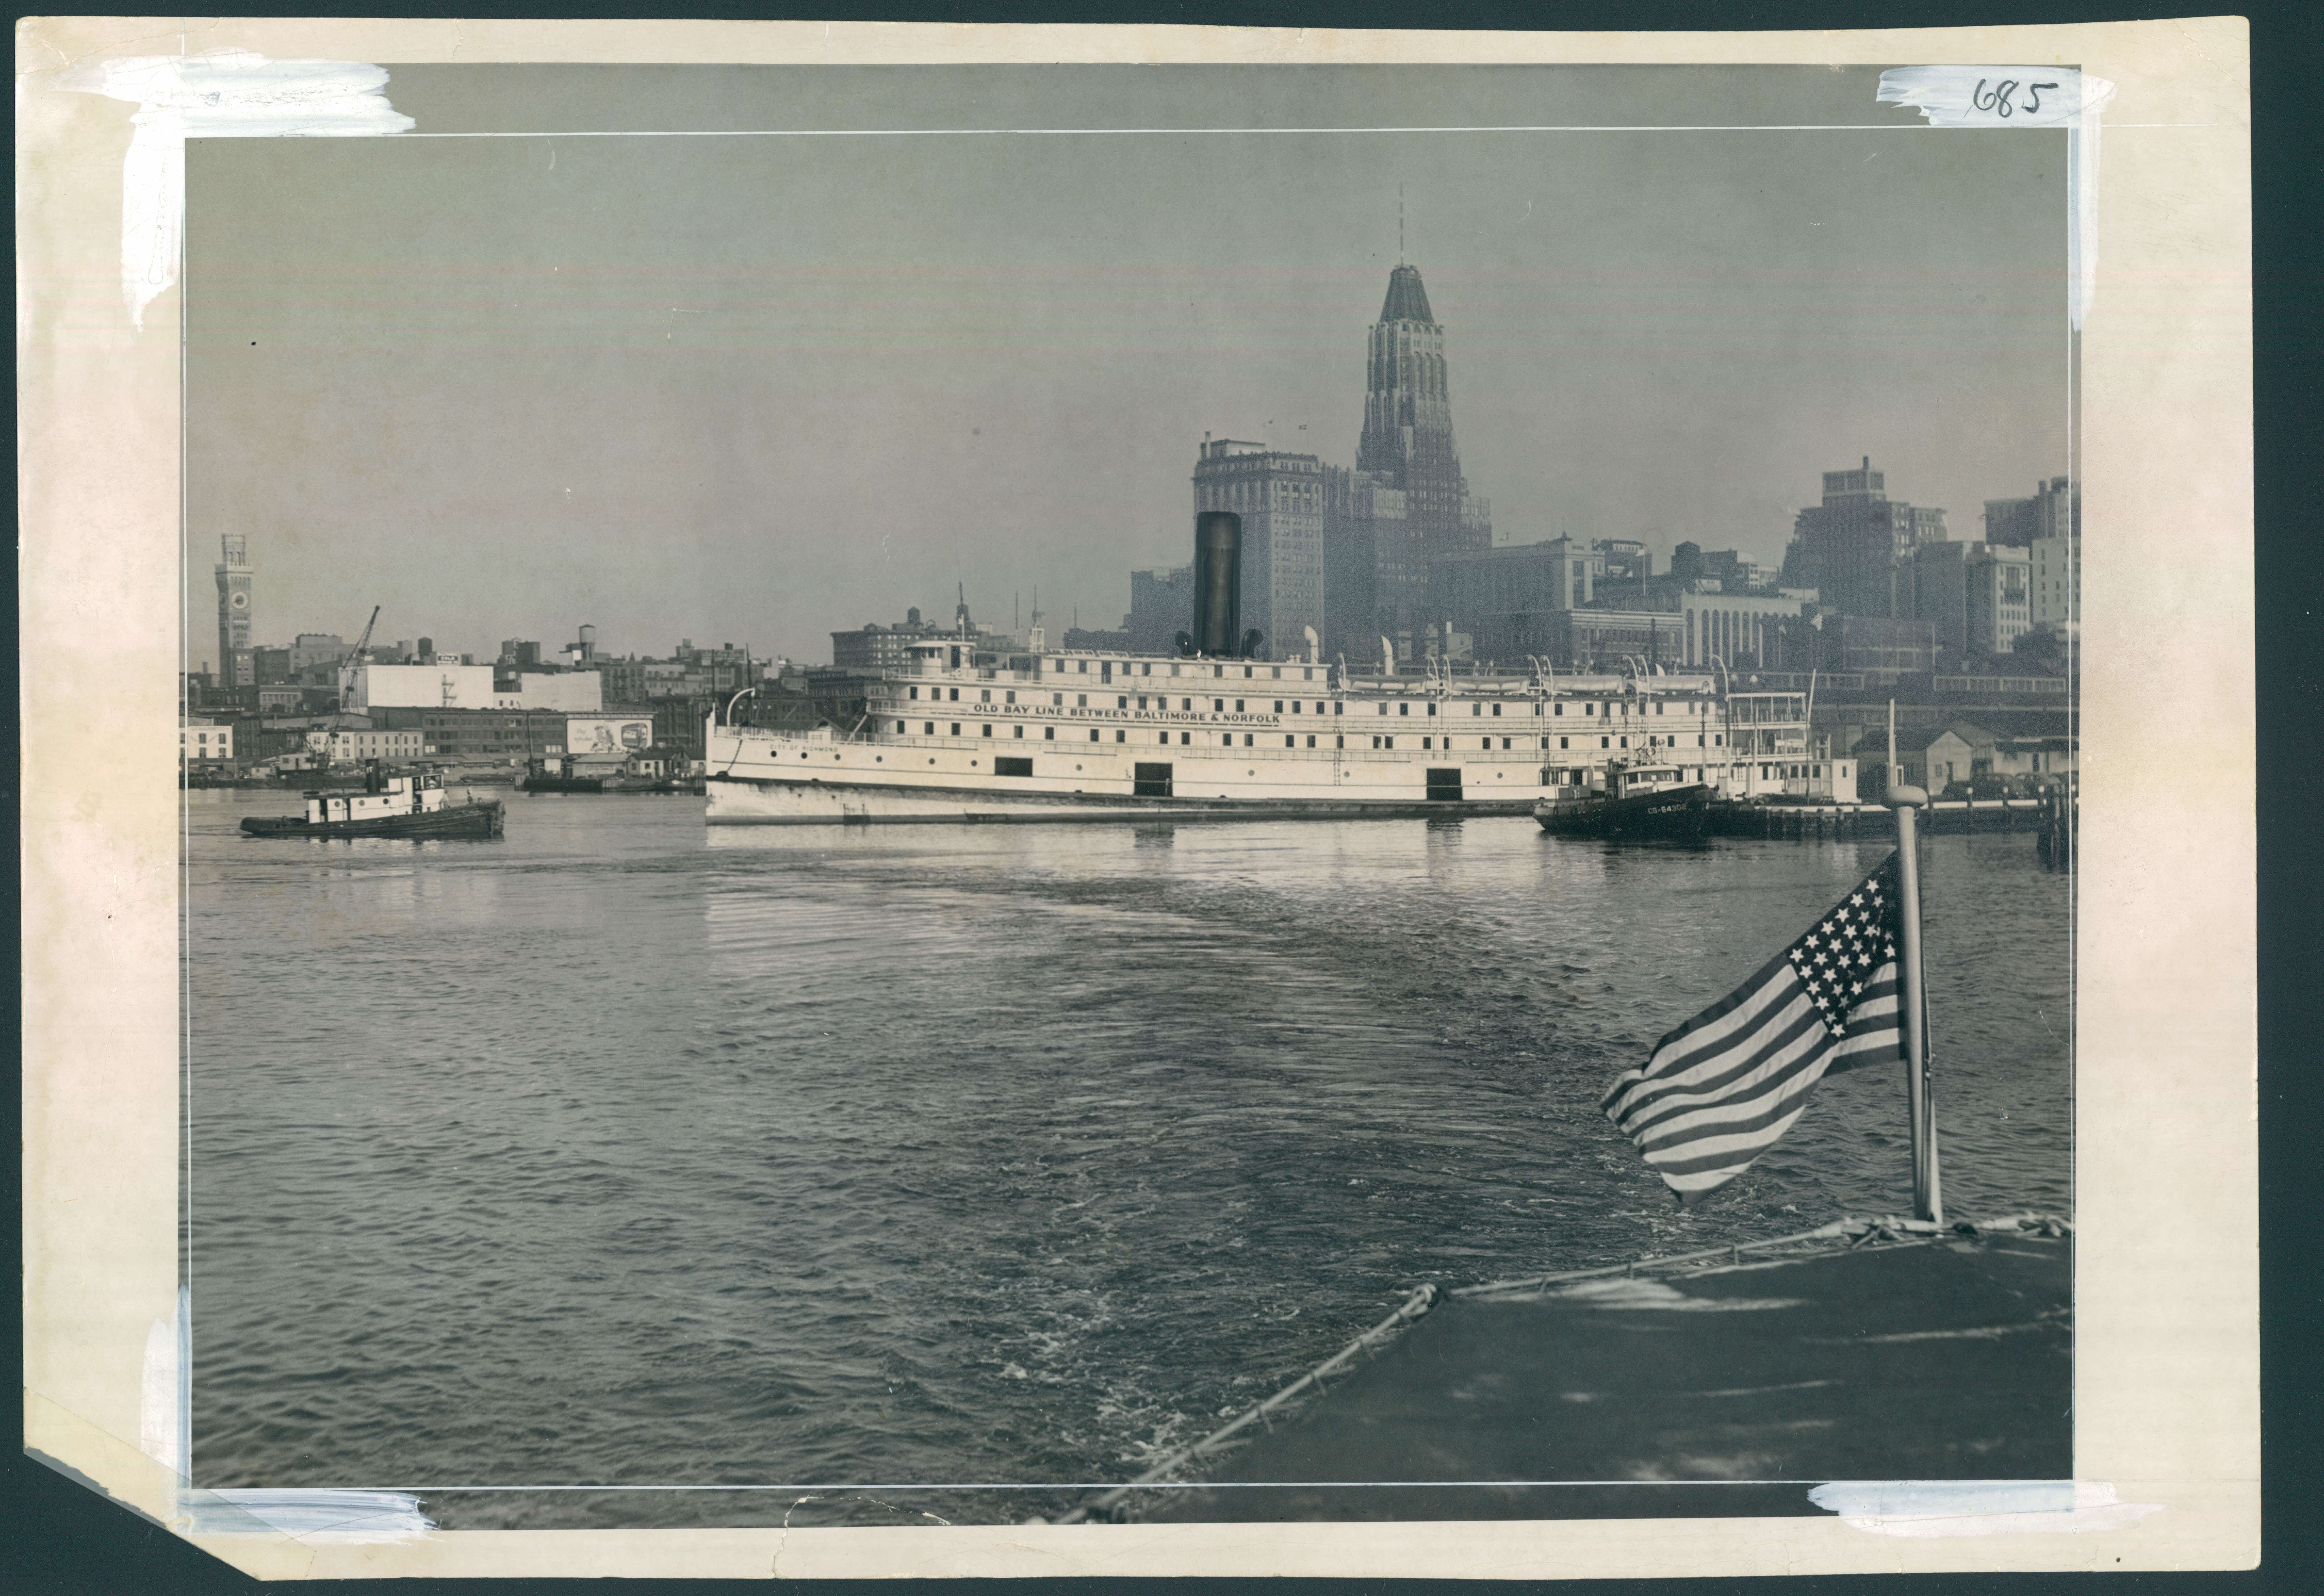 September 6, 1950 - Old Bay Line Boat "City of Richmond" rests in Baltimore's Inner Harbor. Photo by Walter M. McCardell BKM-715-BSDate Created: 1950-09-06 Copyright Notice: Baltimore Sun Folder Description: City Of Richmond Folder Extended Description: 454 - 129 | ( Ship) | Title: CITY OF RICHMOND (SHIP) Subject: CITY OF RICHMOND (SHIP)